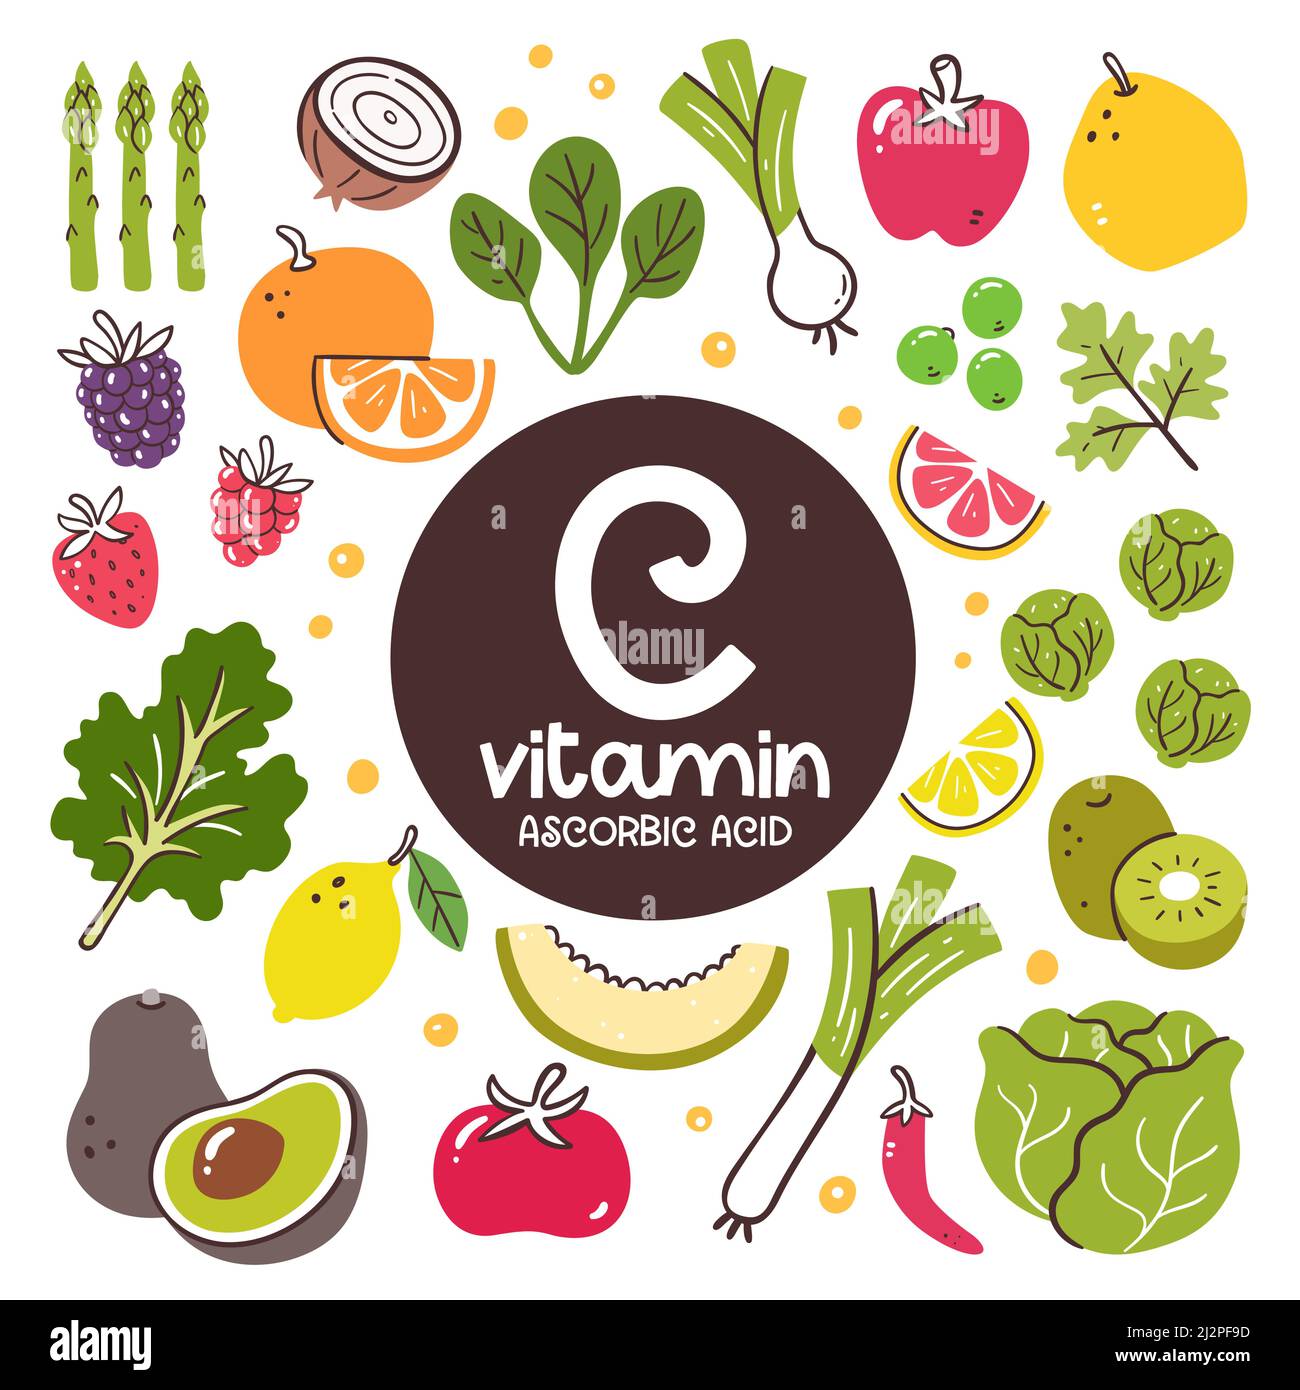 Food products with high level of Vitamin C (ascorbic acid). Cooking ingredients. Fruits and vegetables. Stock Vector